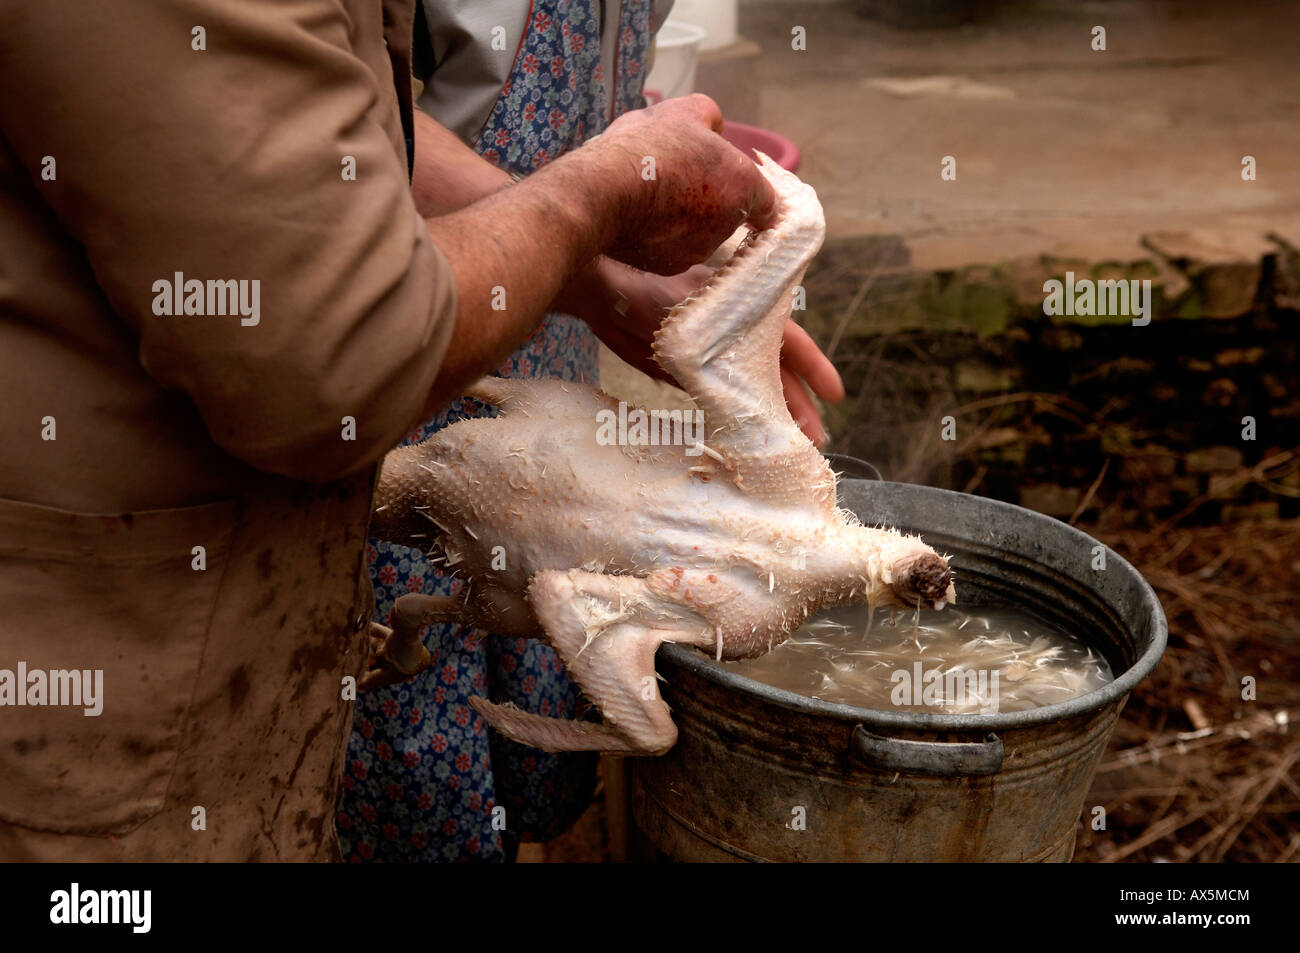 Home slaughtering (duck), farmer plucking the feathers from a duck, Eckental, Middle Franconia, Bavaria, Germany, Europe Stock Photo